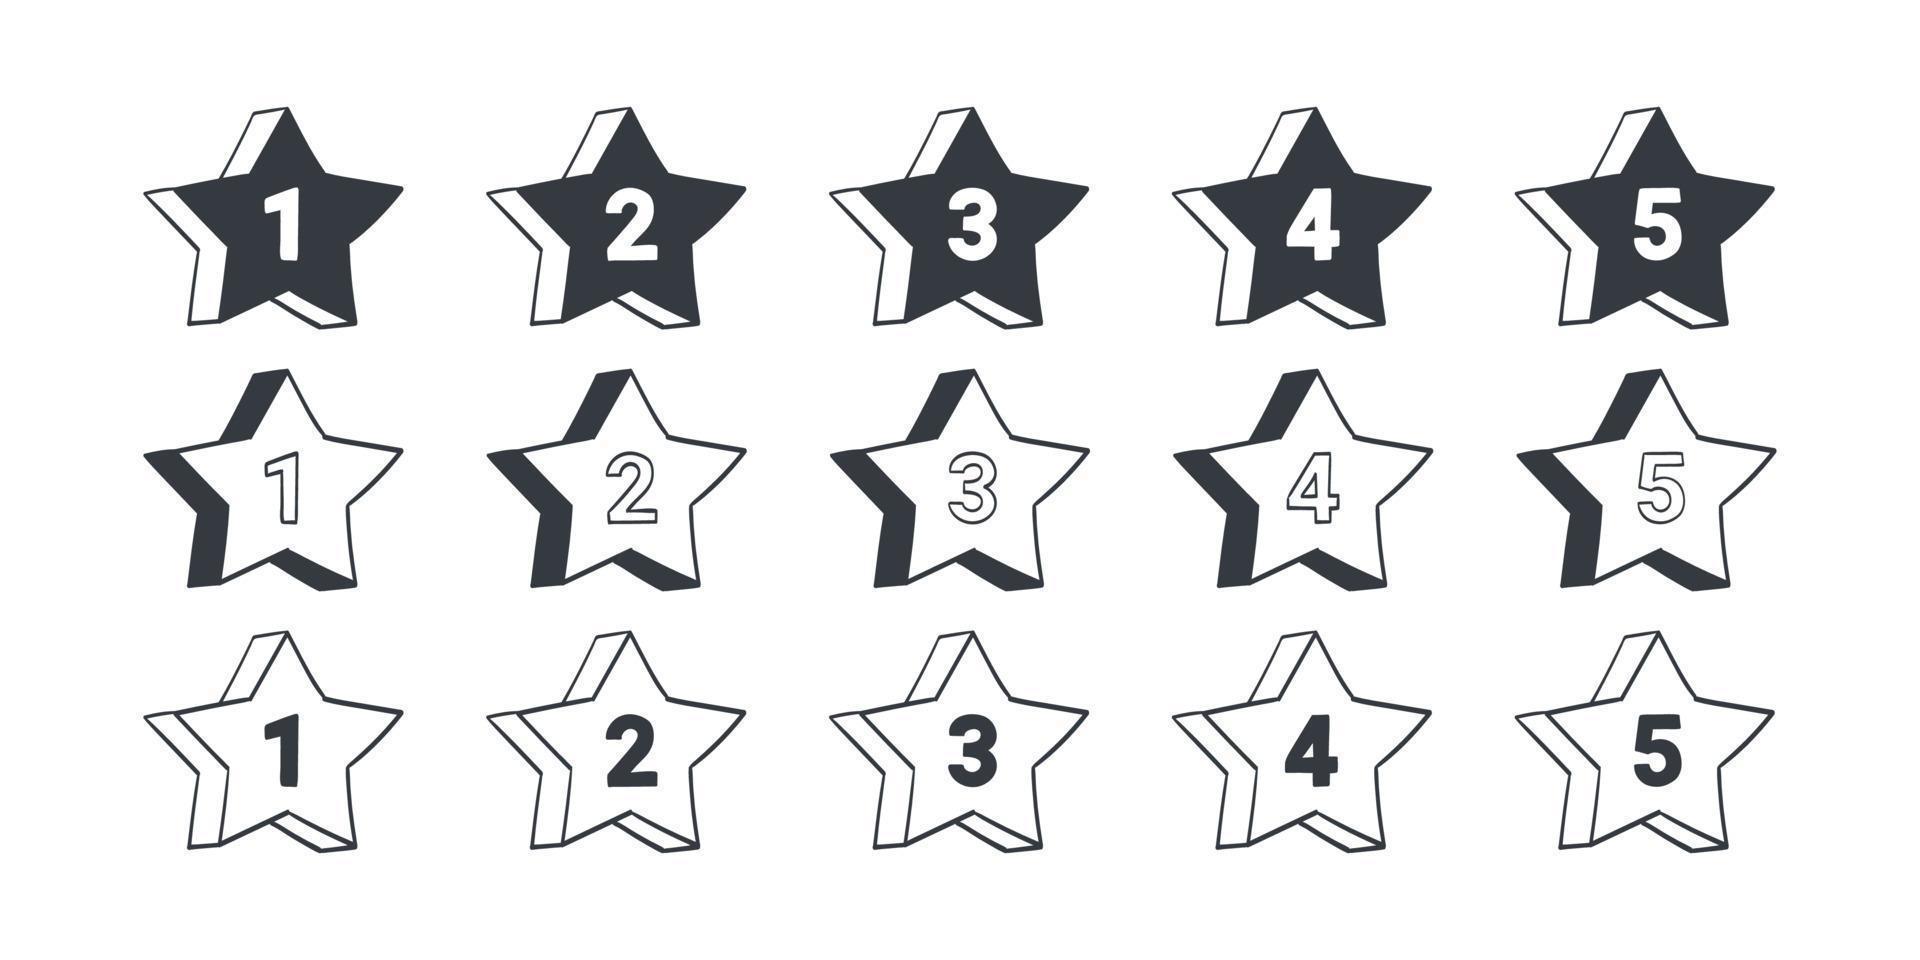 Rating signs. Stars quality rating icons. Drawn icons of stars. Vector illustration